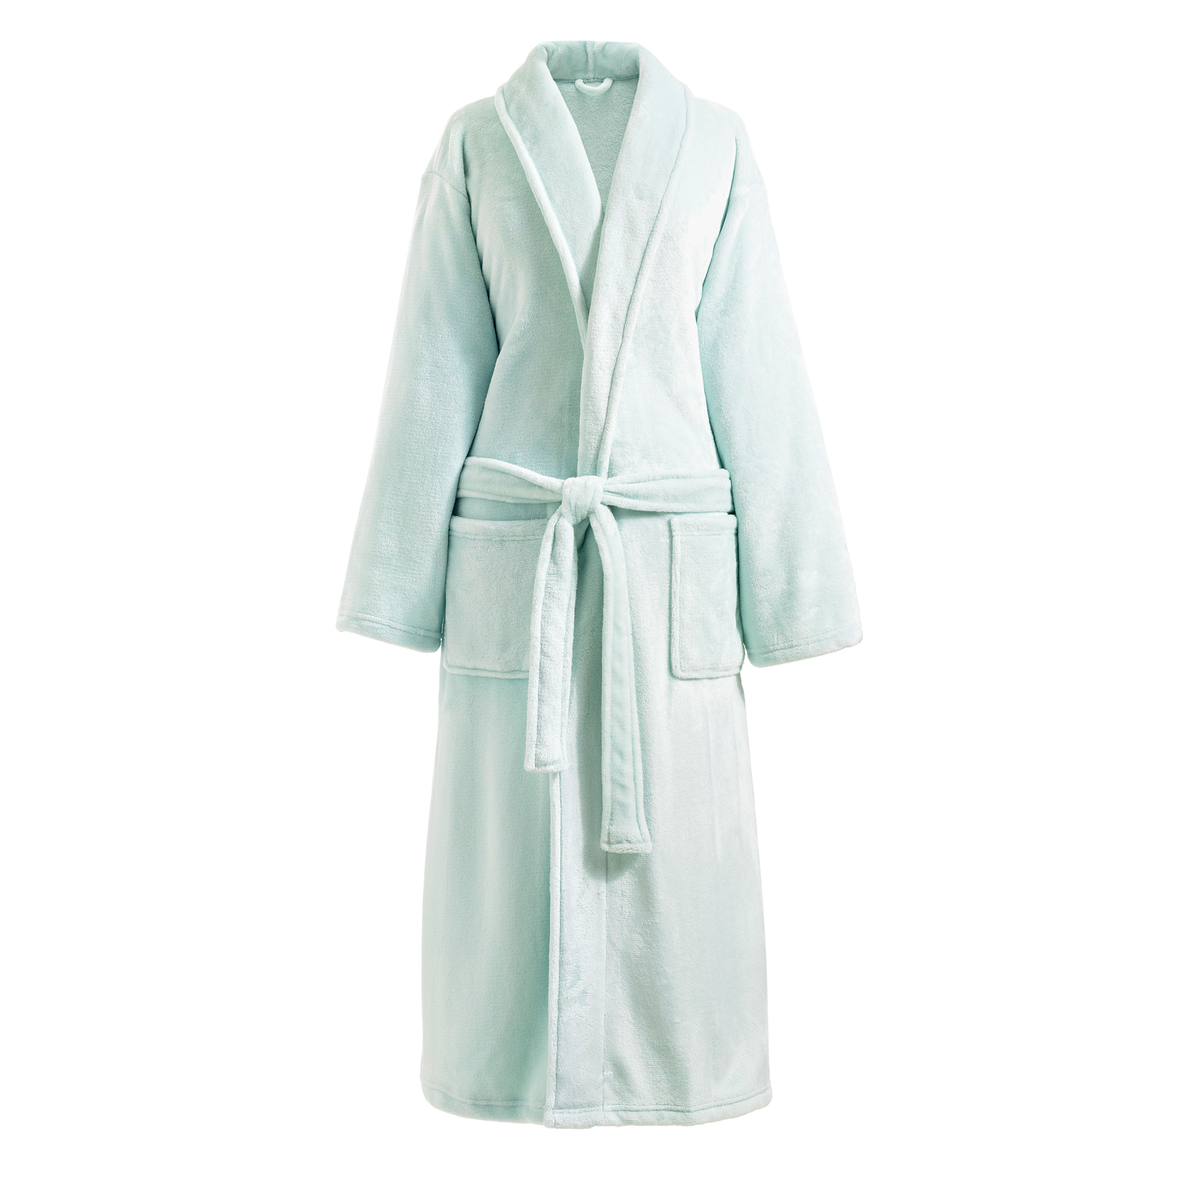 Whole Image of Pine Cone Hill Sheepy Fleece 2.0 Robe in Chalk Blue Color